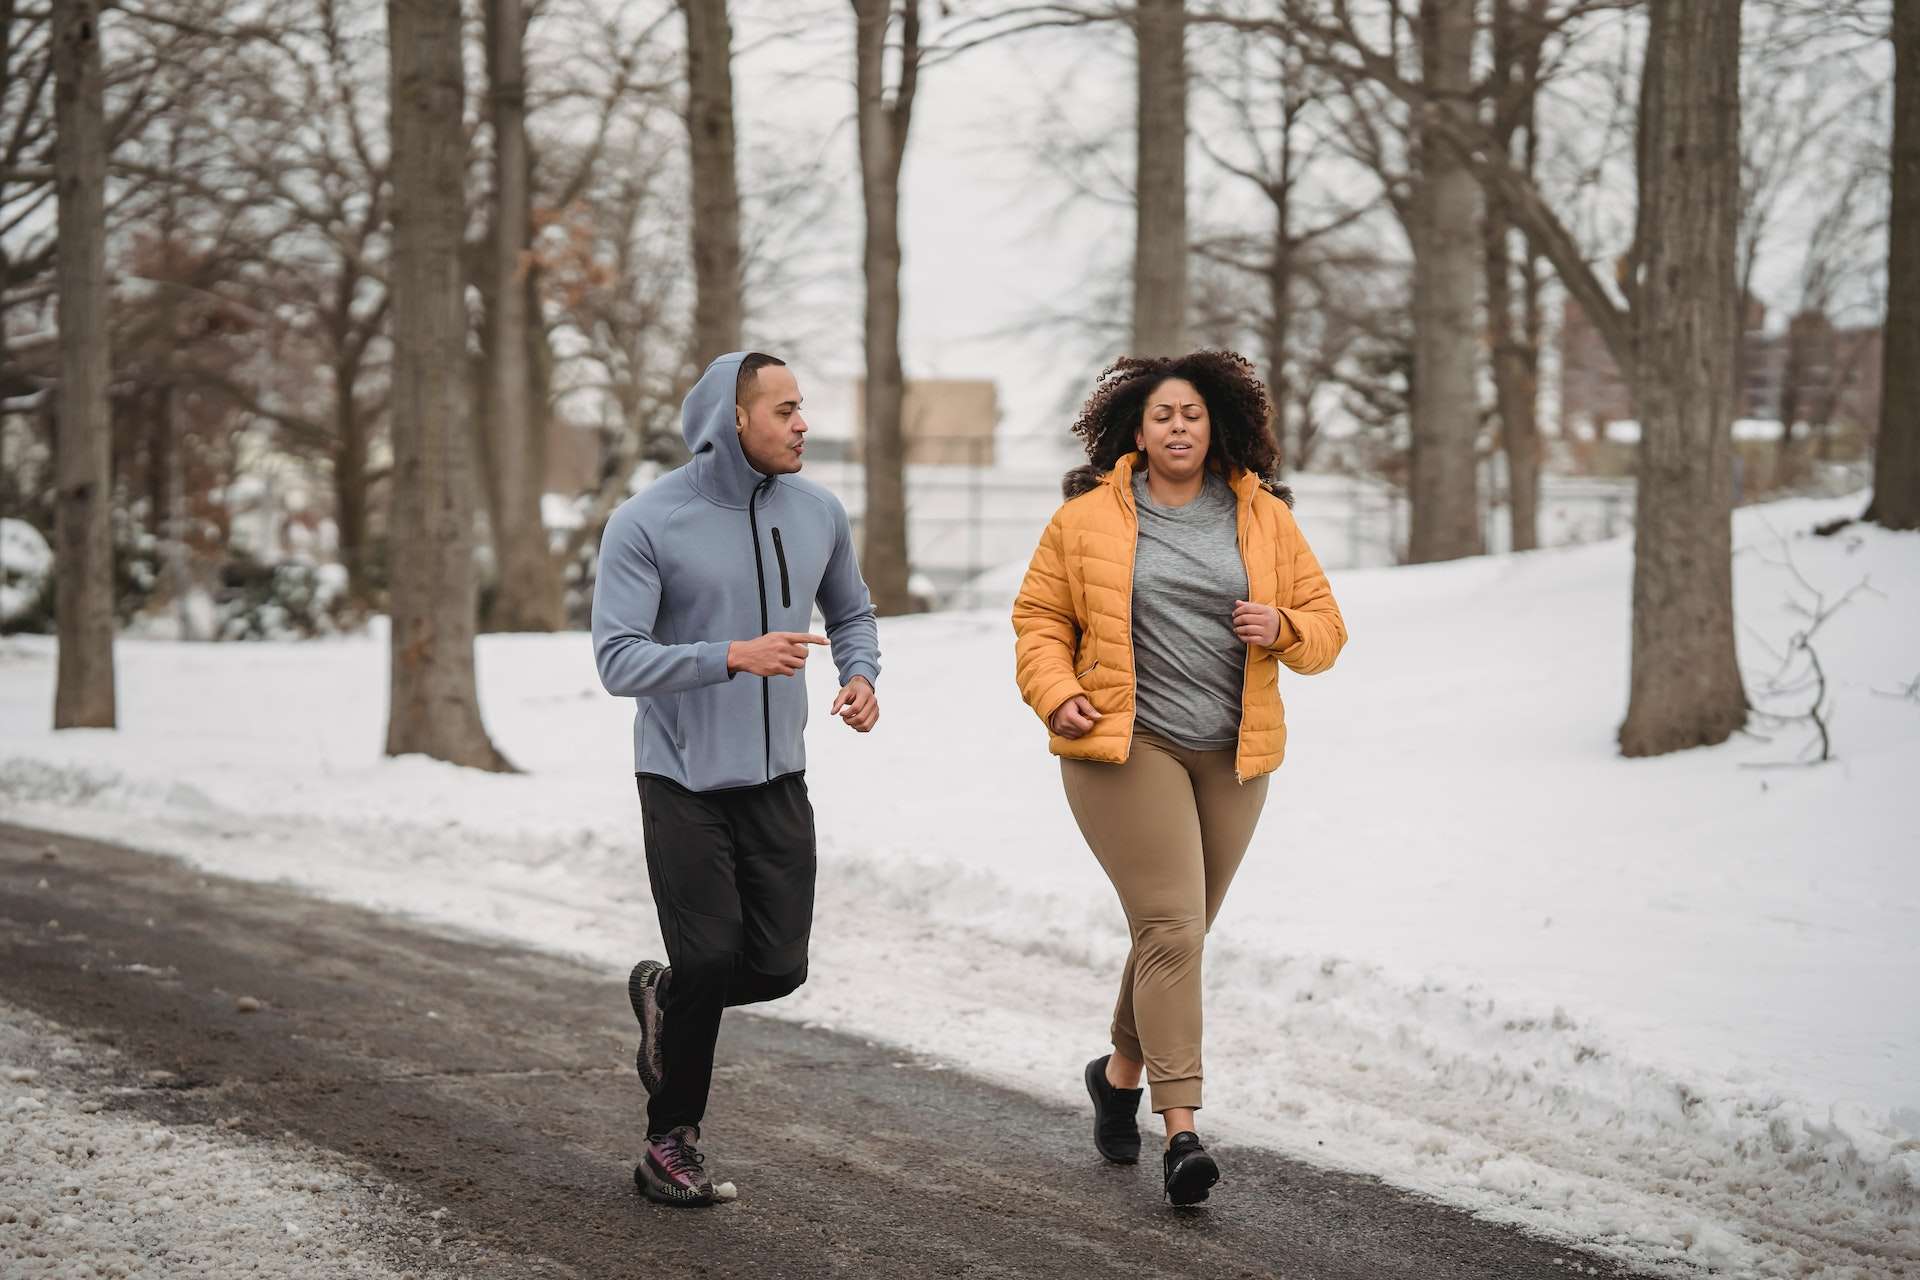 Plump black woman running with trainer in winter park